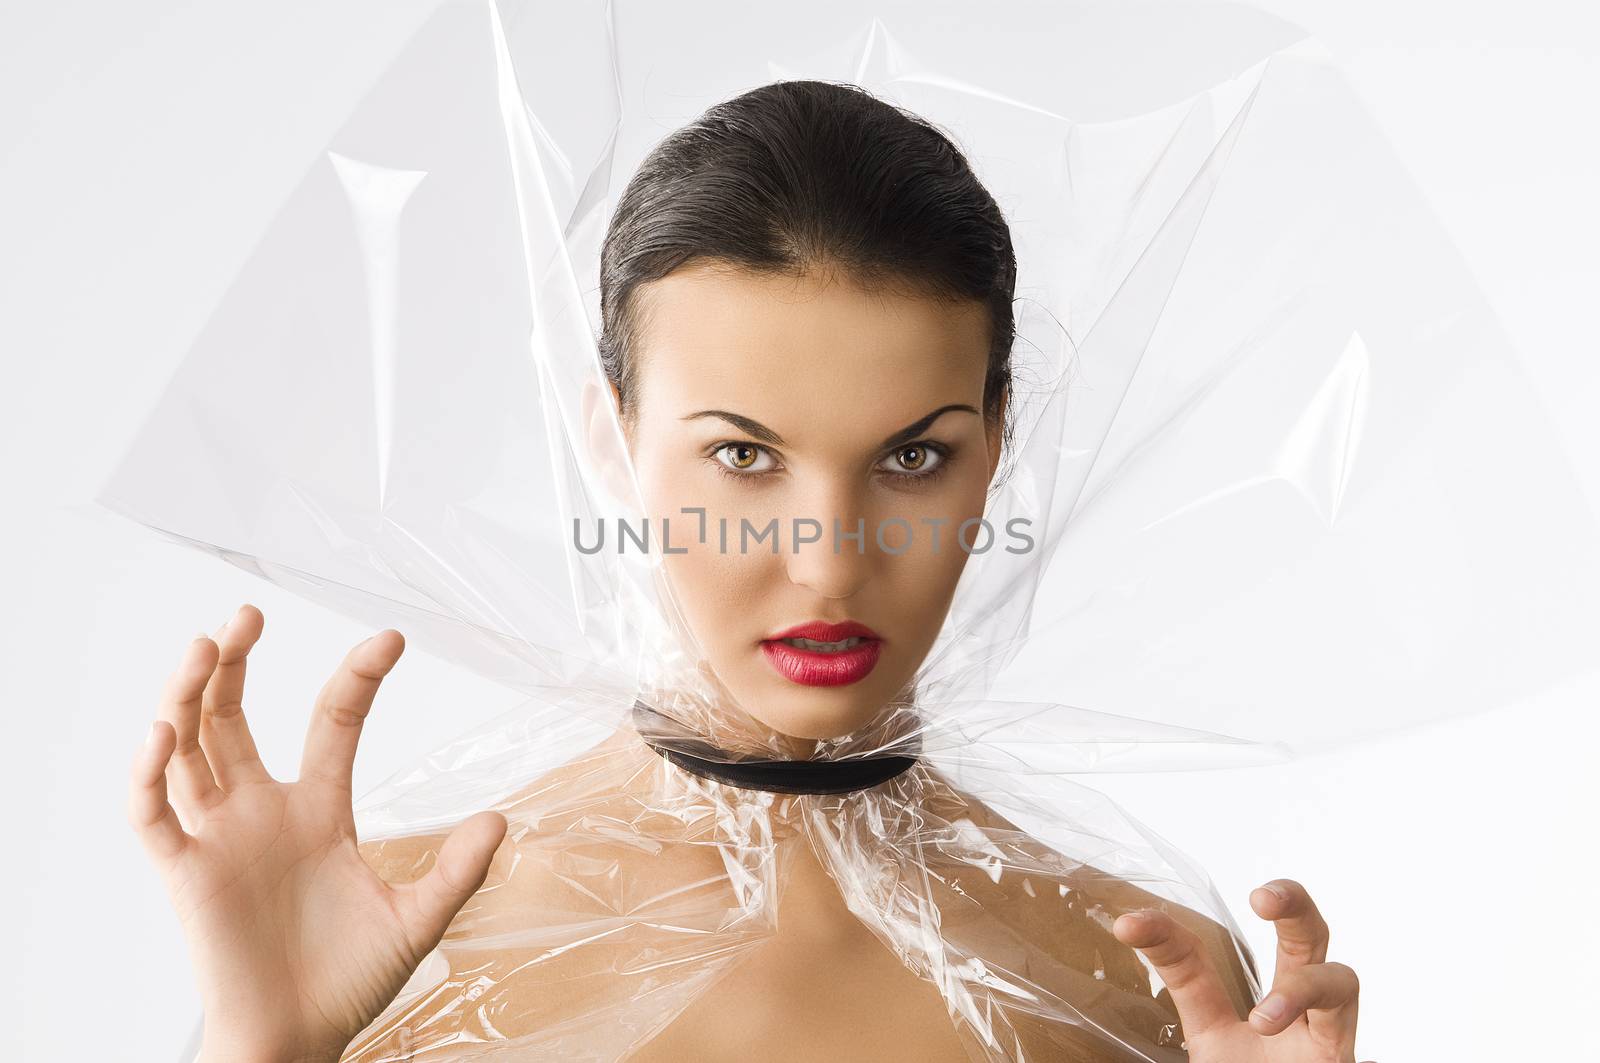 cute girl looking as angry vampire with cellophane as cloak, she looks in to the lens with an aggressive axpression